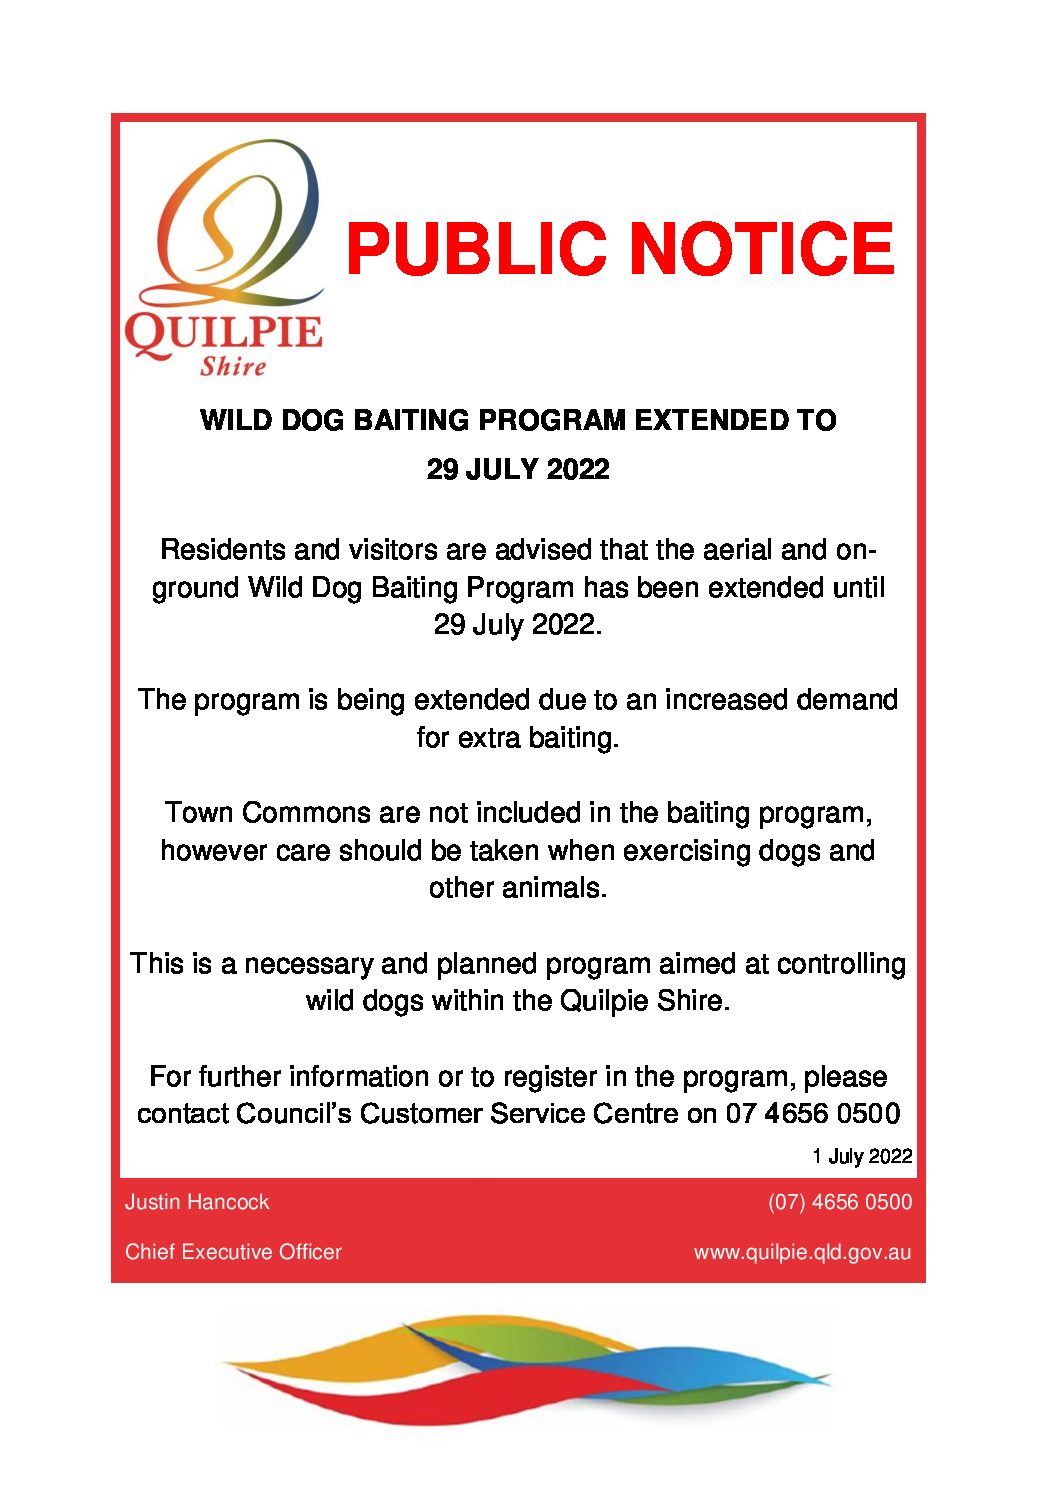 Wild Dog Baiting Program Extended to 29 July 2022